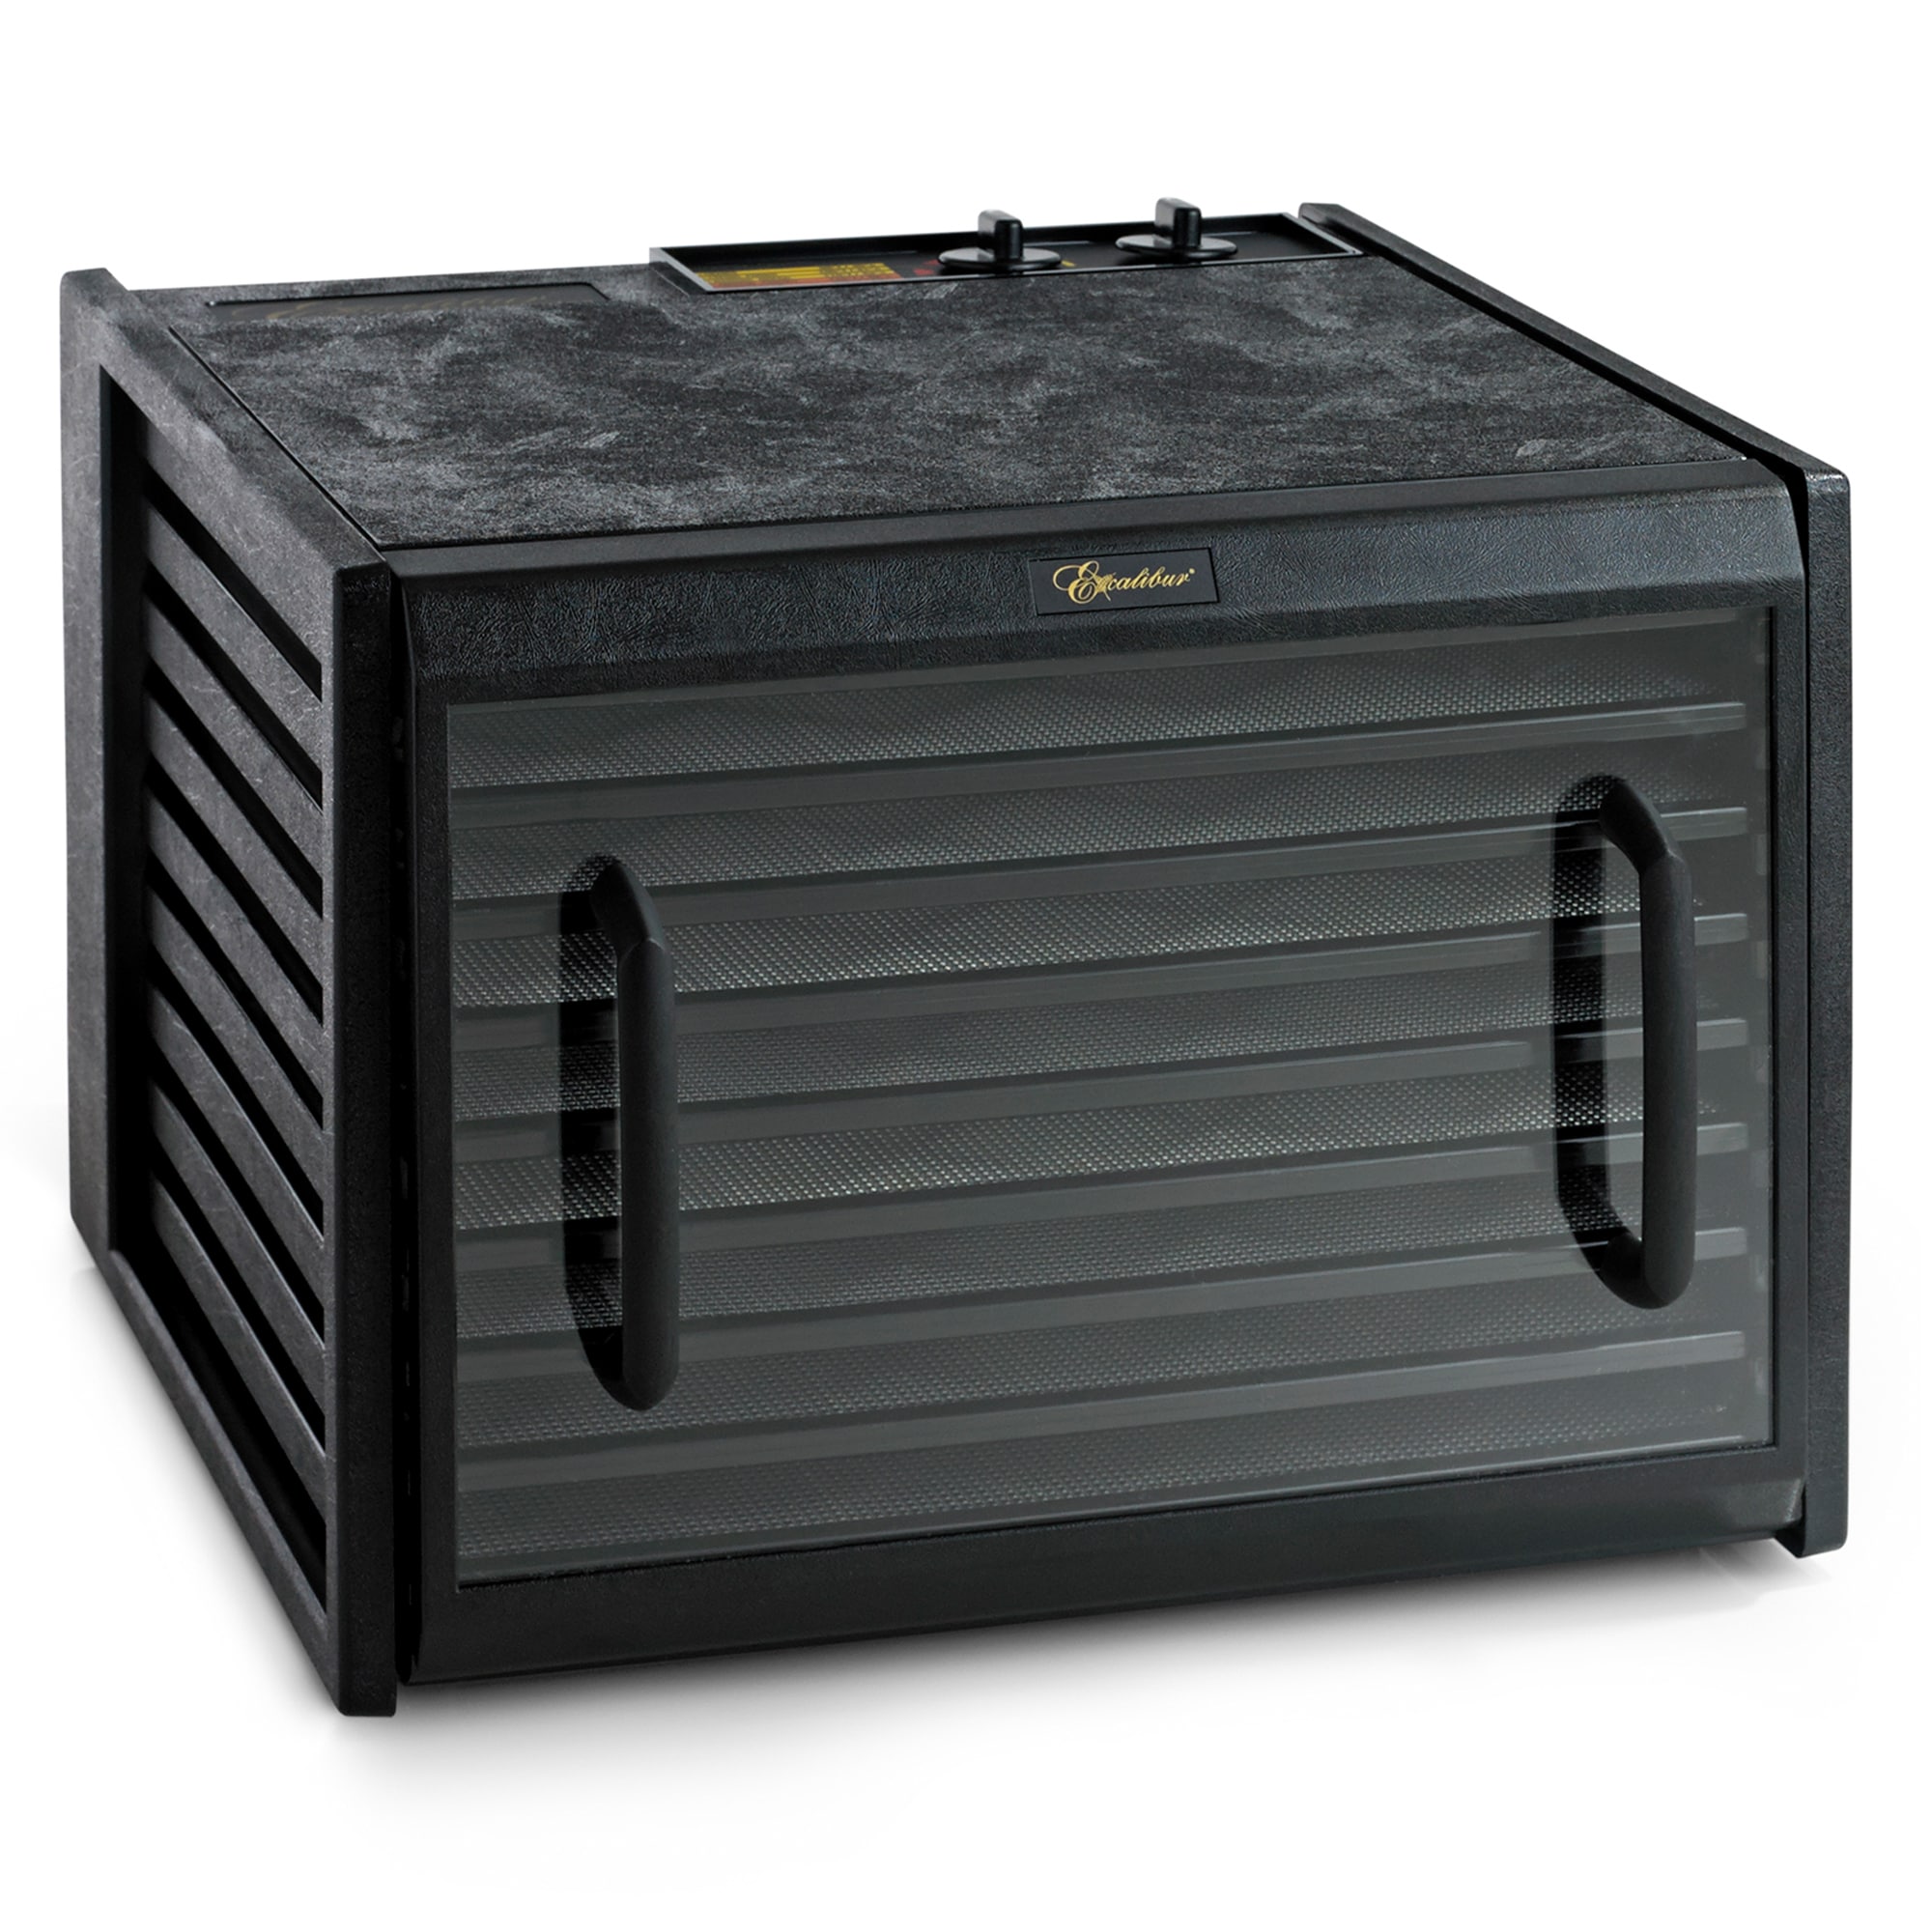 Excalibur 9 Tray Deluxe Food Dehydrator, Programmable, 15 sq ft Drying  Area, Black, Ideal for Large Families & Gardens